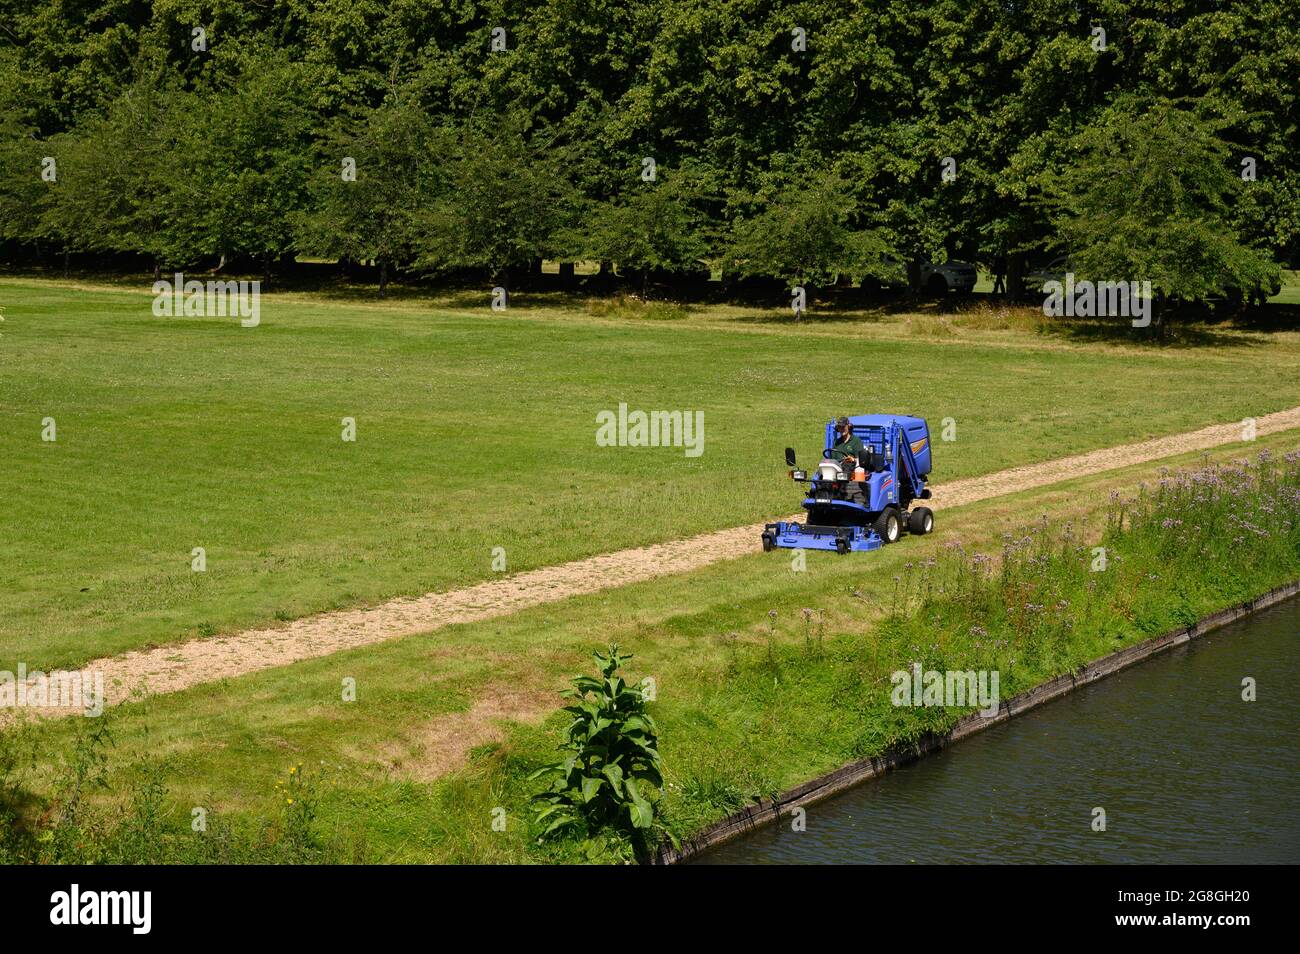 Lawn mower or grass cutting machine in the grounds of the University of Cambridge. Stock Photo